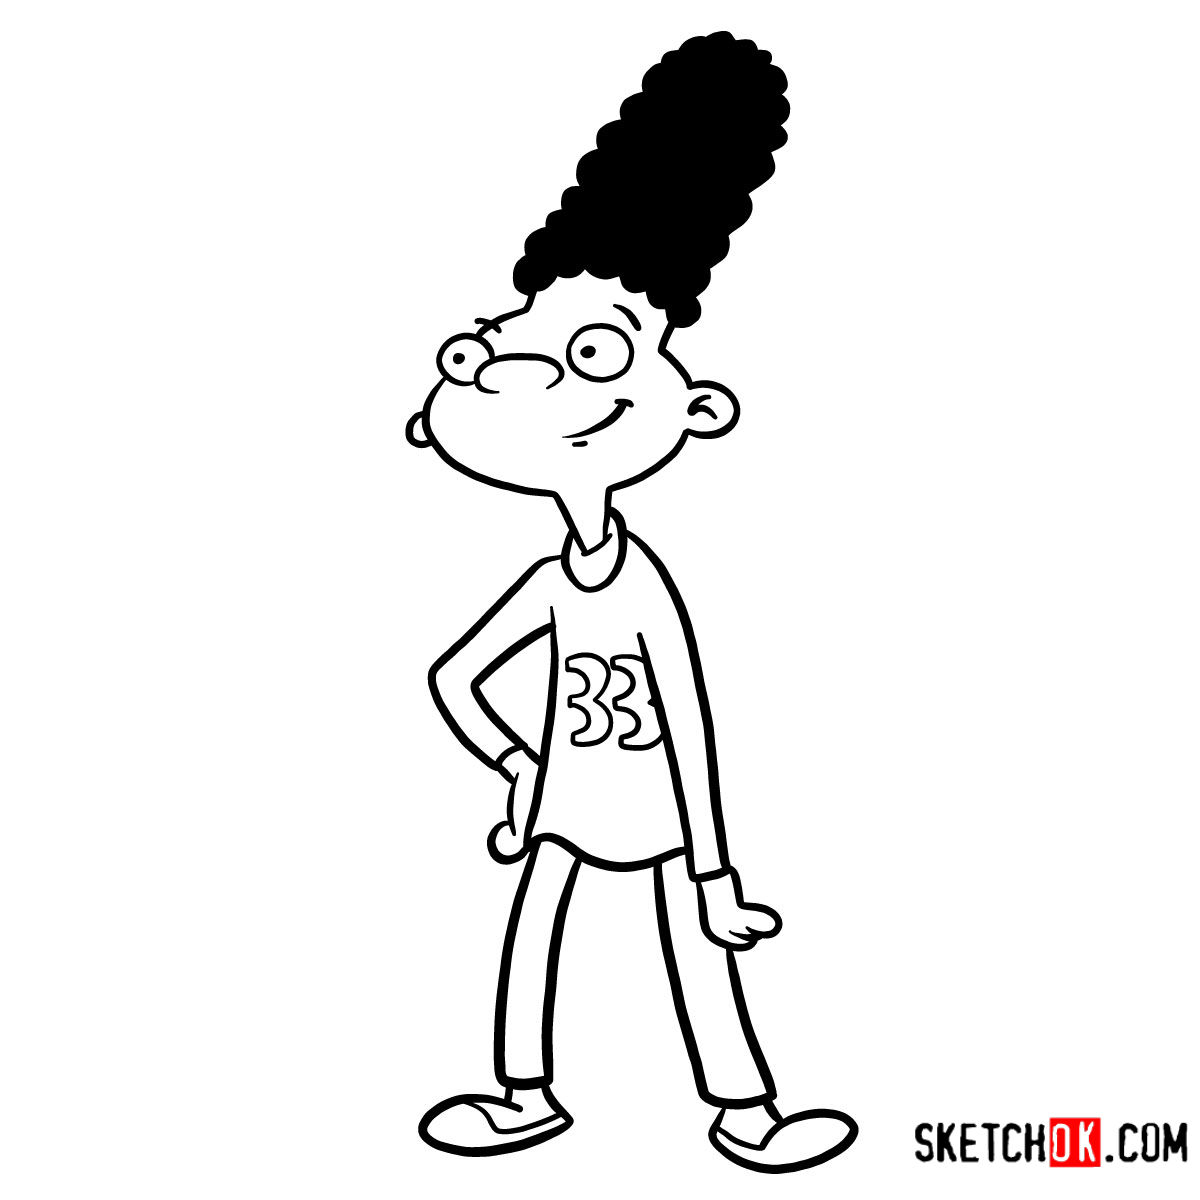 How to draw Gerald | Hey Arnold